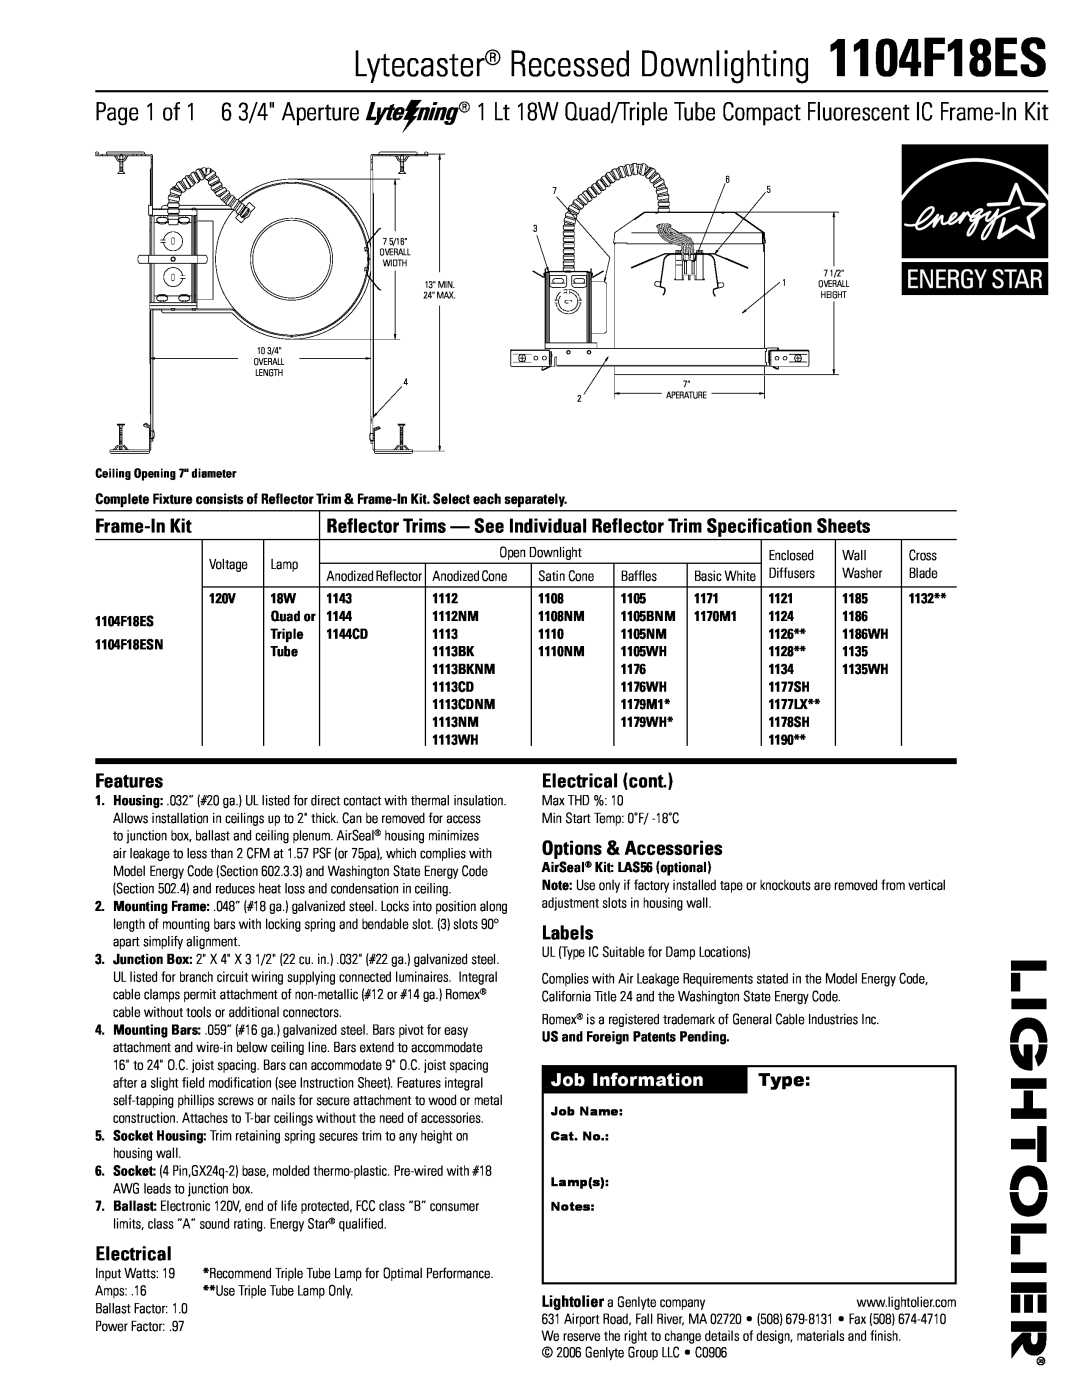 Lightolier specifications Lytecaster Recessed Downlighting 1104F18ES, Frame-InKit, Features, Electrical, Labels, Type 